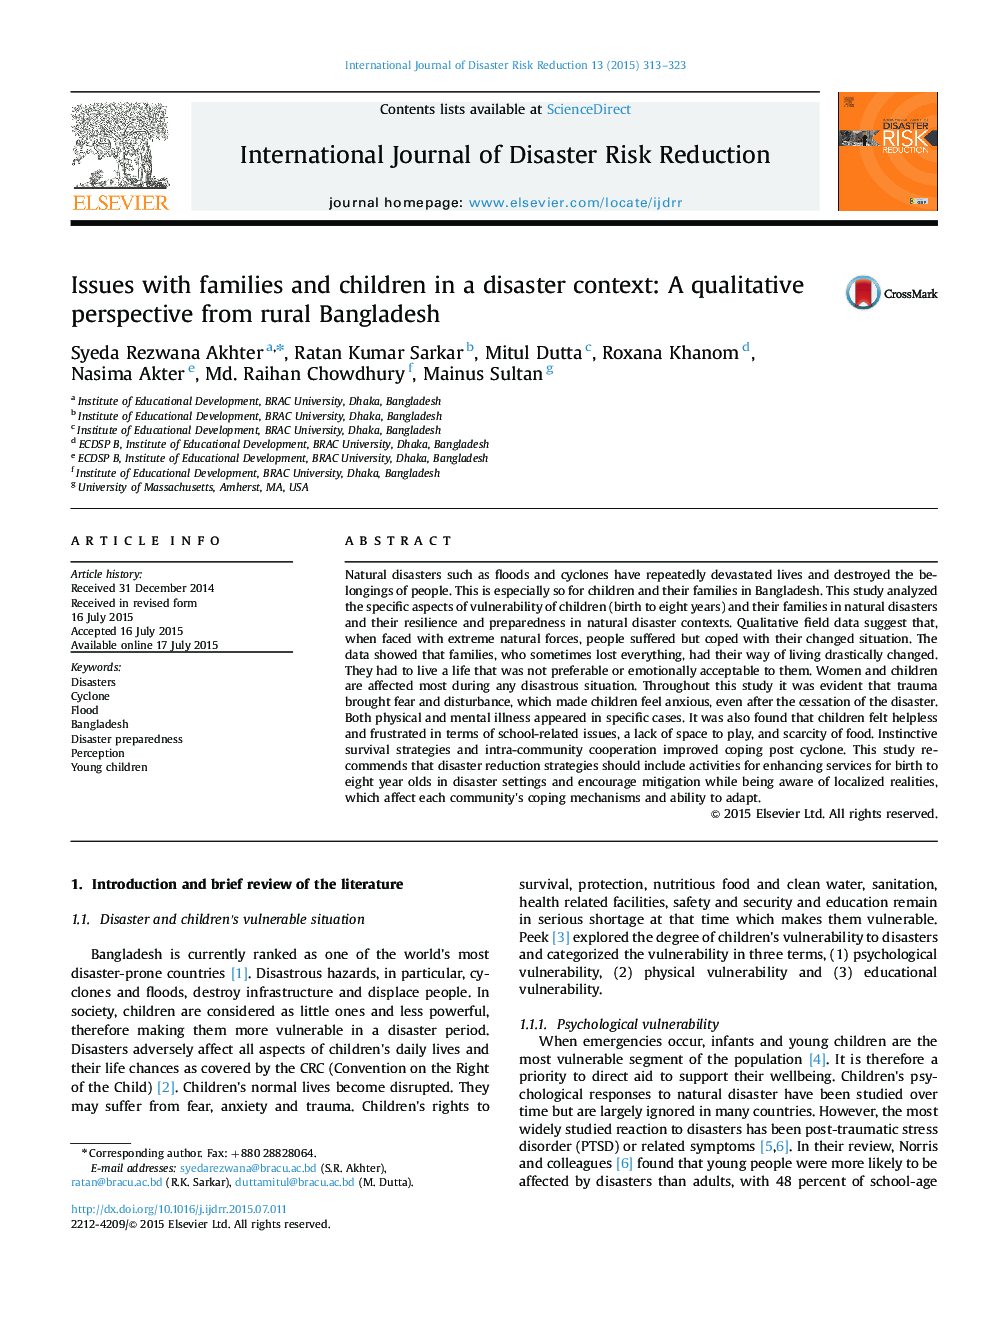 Issues with families and children in a disaster context: A qualitative perspective from rural Bangladesh